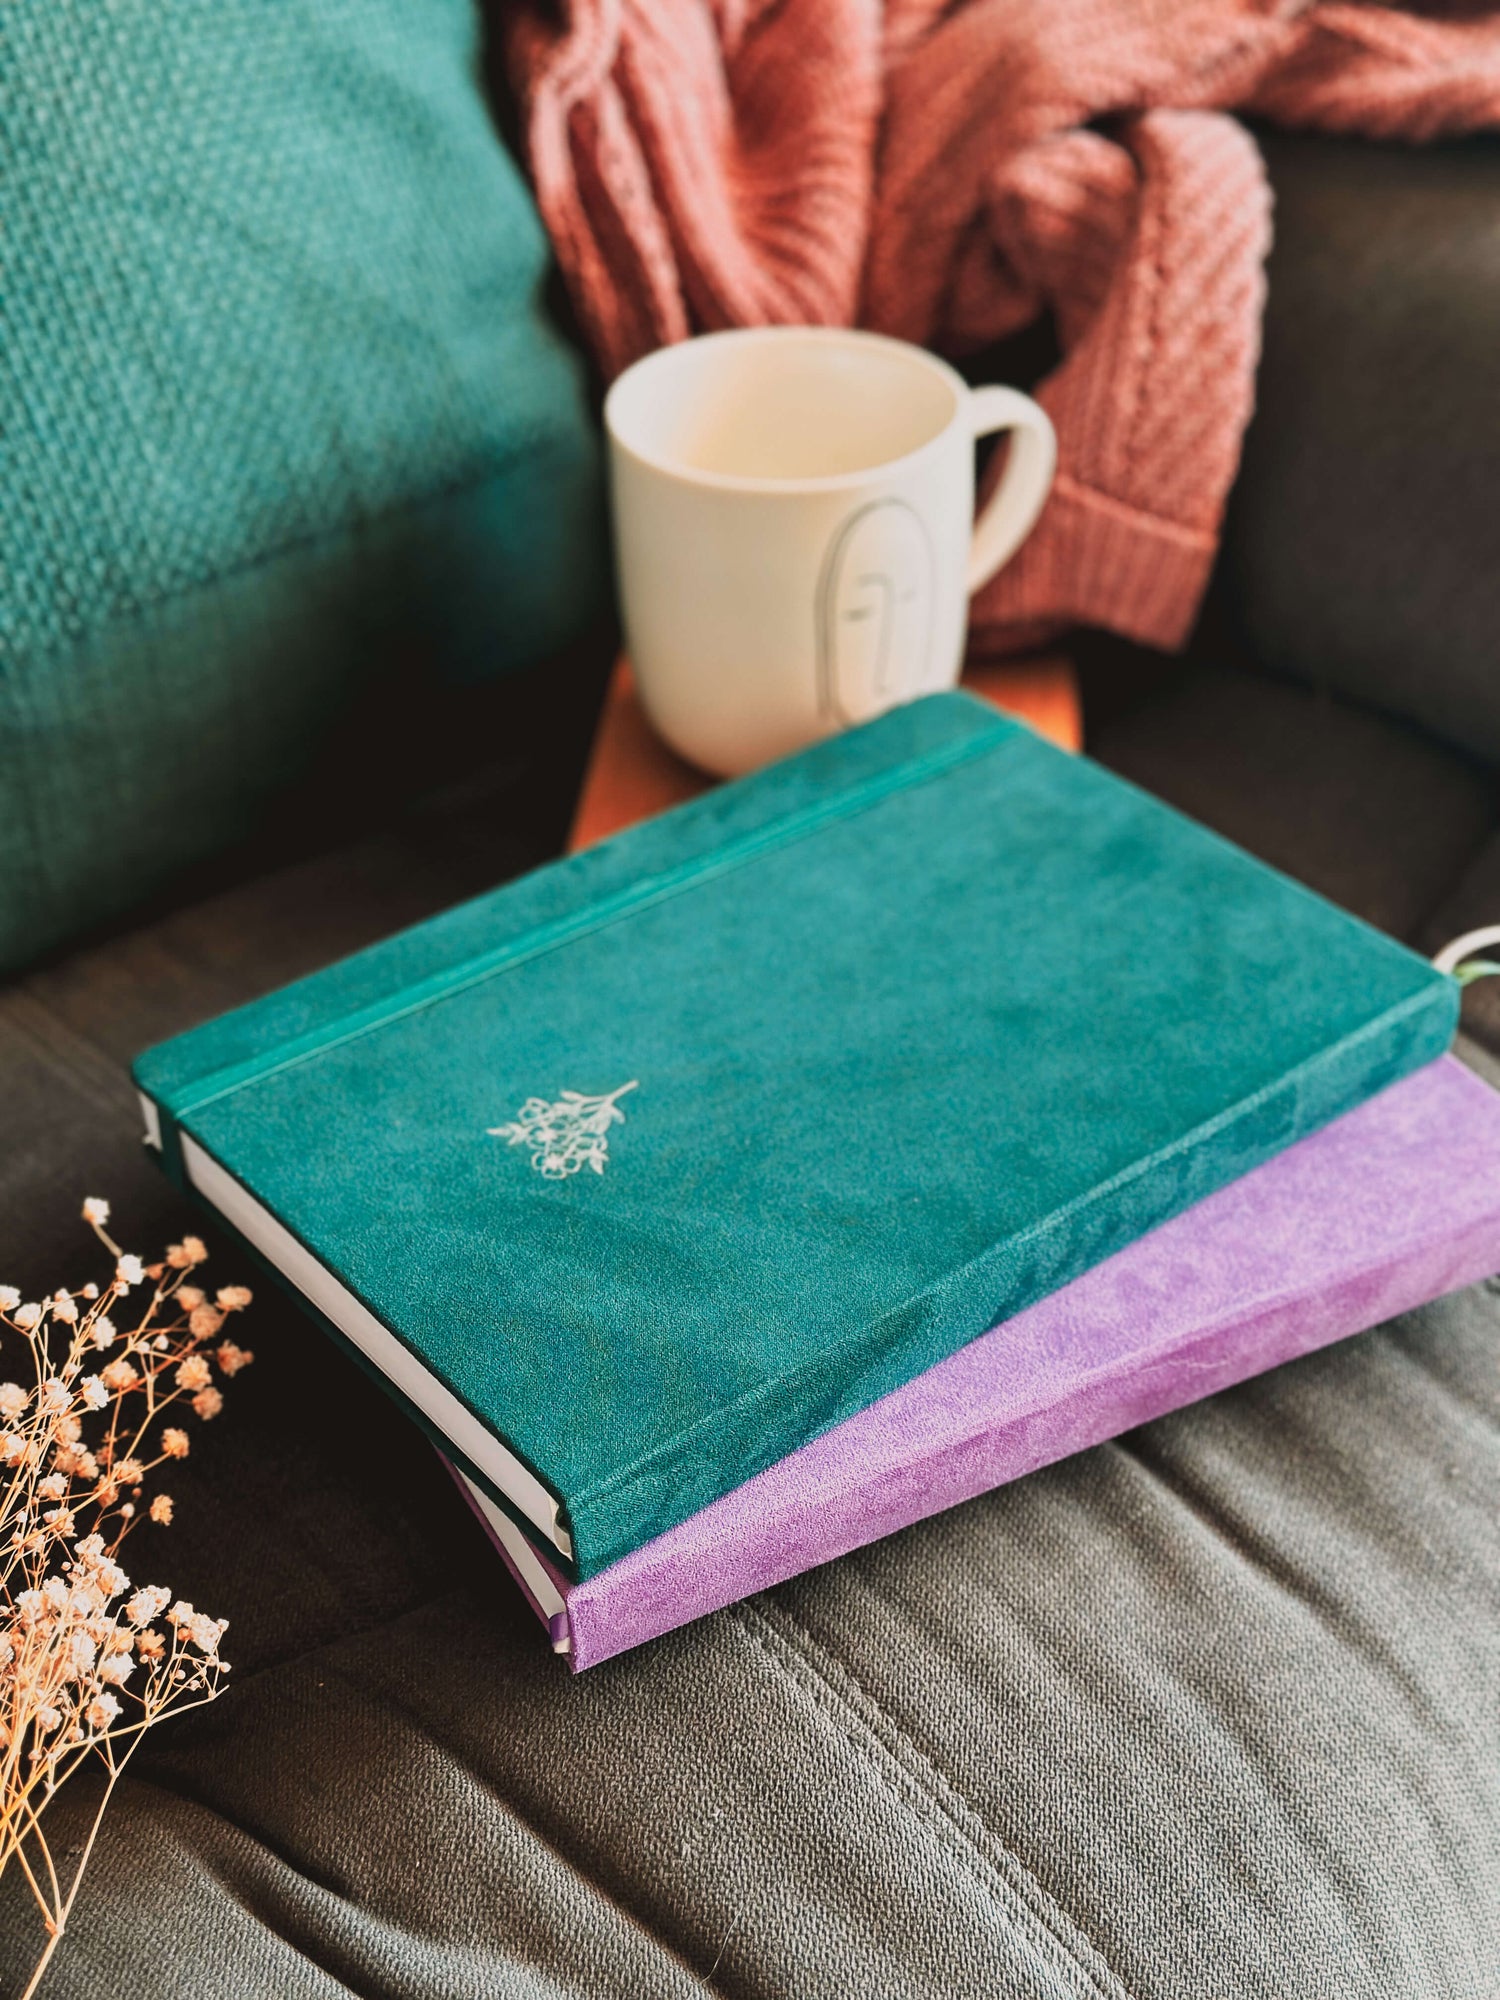 Green and purple journal with velvet journals on couch